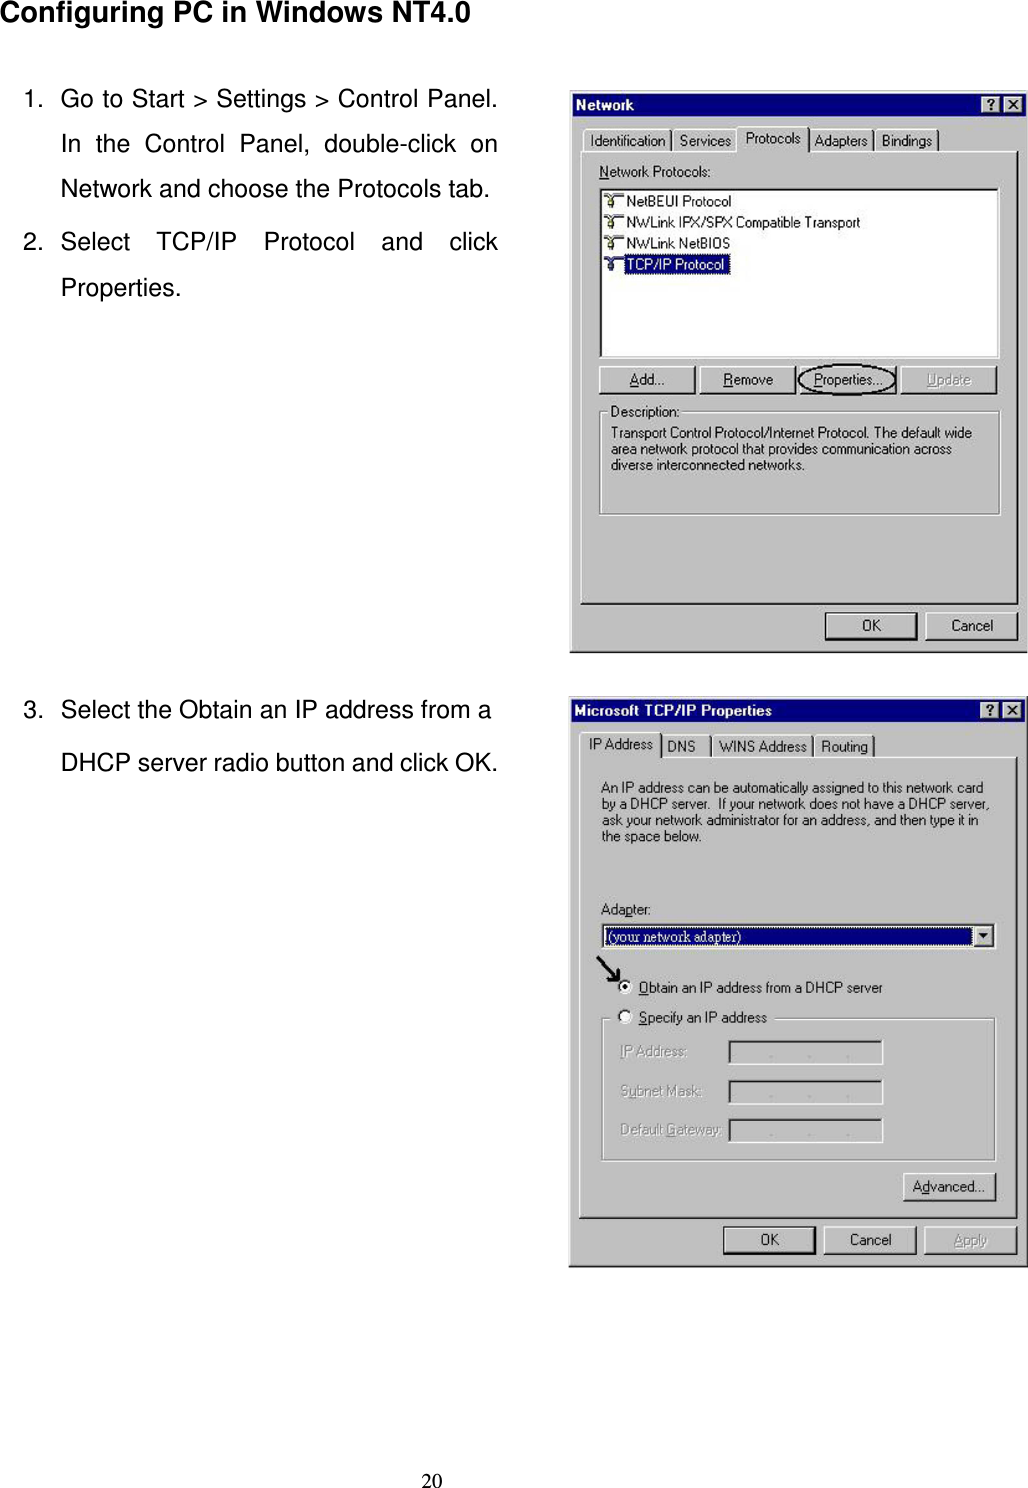   20Configuring PC in Windows NT4.0  1.  Go to Start &gt; Settings &gt; Control Panel. In  the  Control  Panel,  double-click  on Network and choose the Protocols tab. 2.  Select  TCP/IP  Protocol  and  click Properties.   3.  Select the Obtain an IP address from a DHCP server radio button and click OK.      